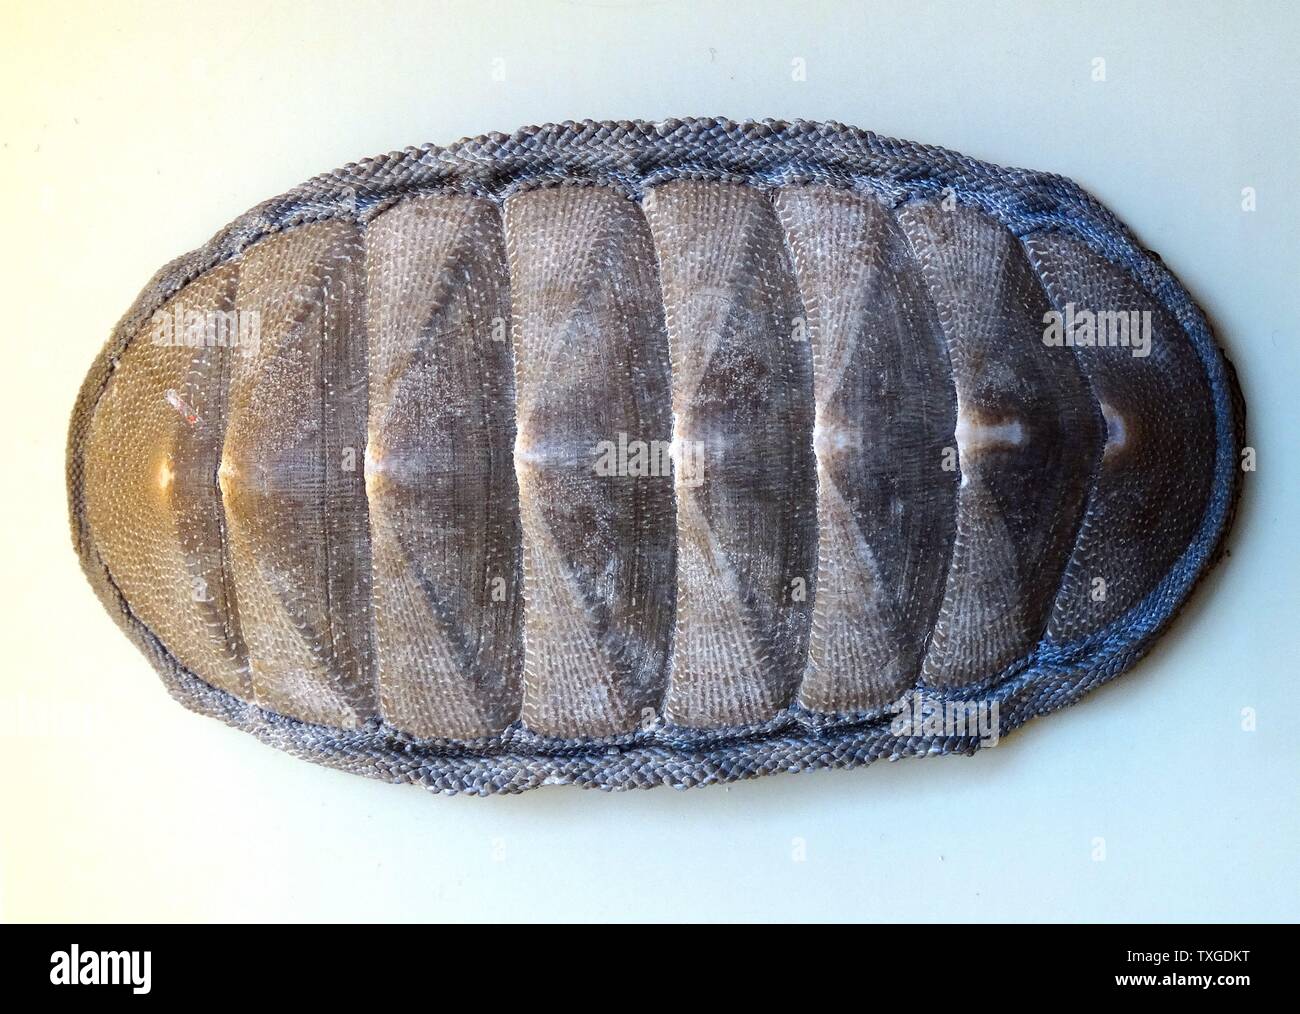 Chiton Magnificus, species of edible chiton, a marine polyplacophoran mollusk in the family Chitonidae, the typical chitons. Chile. Dated 1827 Stock Photo